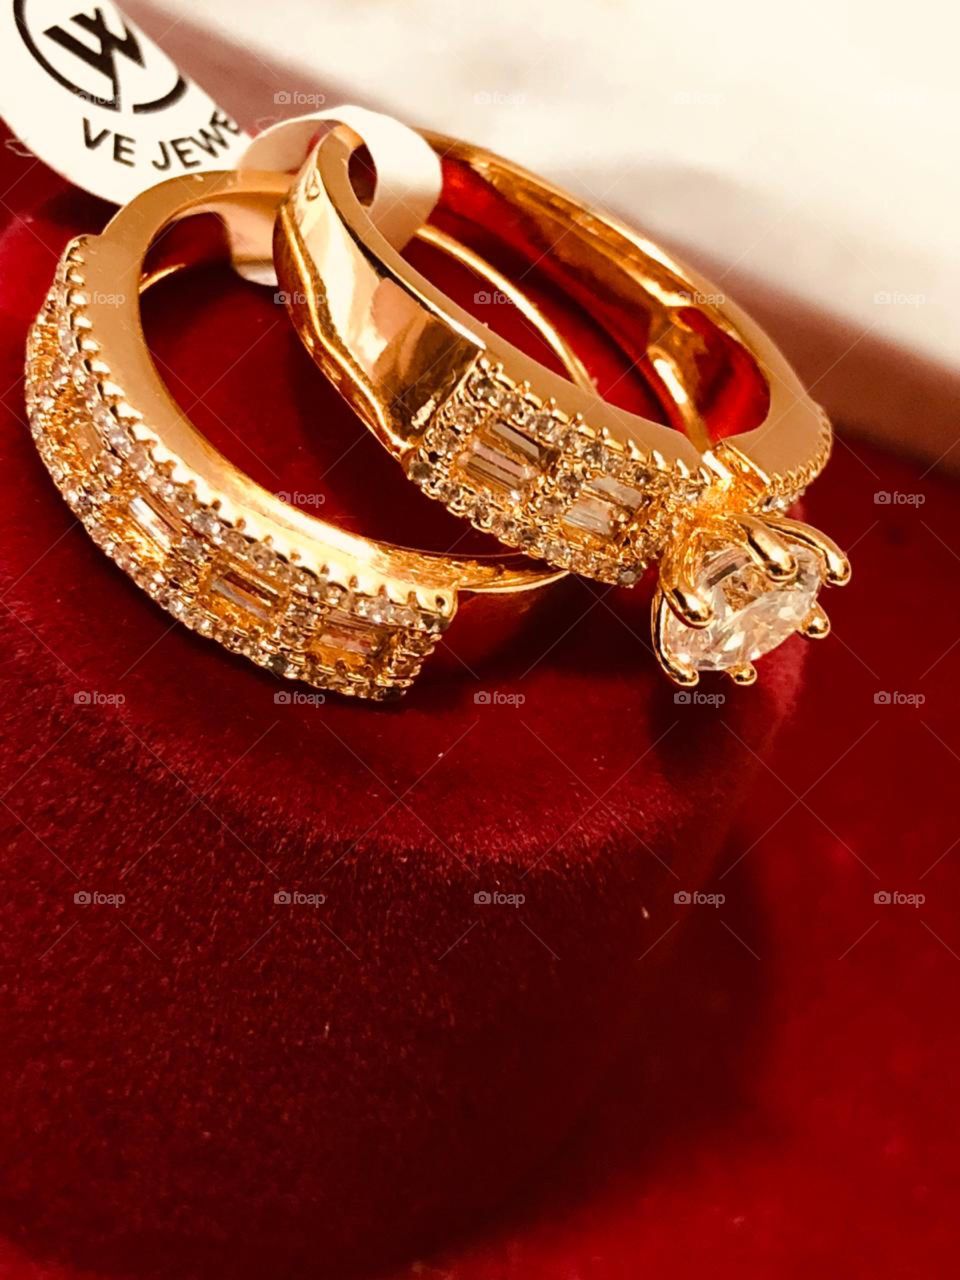 king of the kings wear it i must say, an exclusive piece of jewelery and fashion totally insane